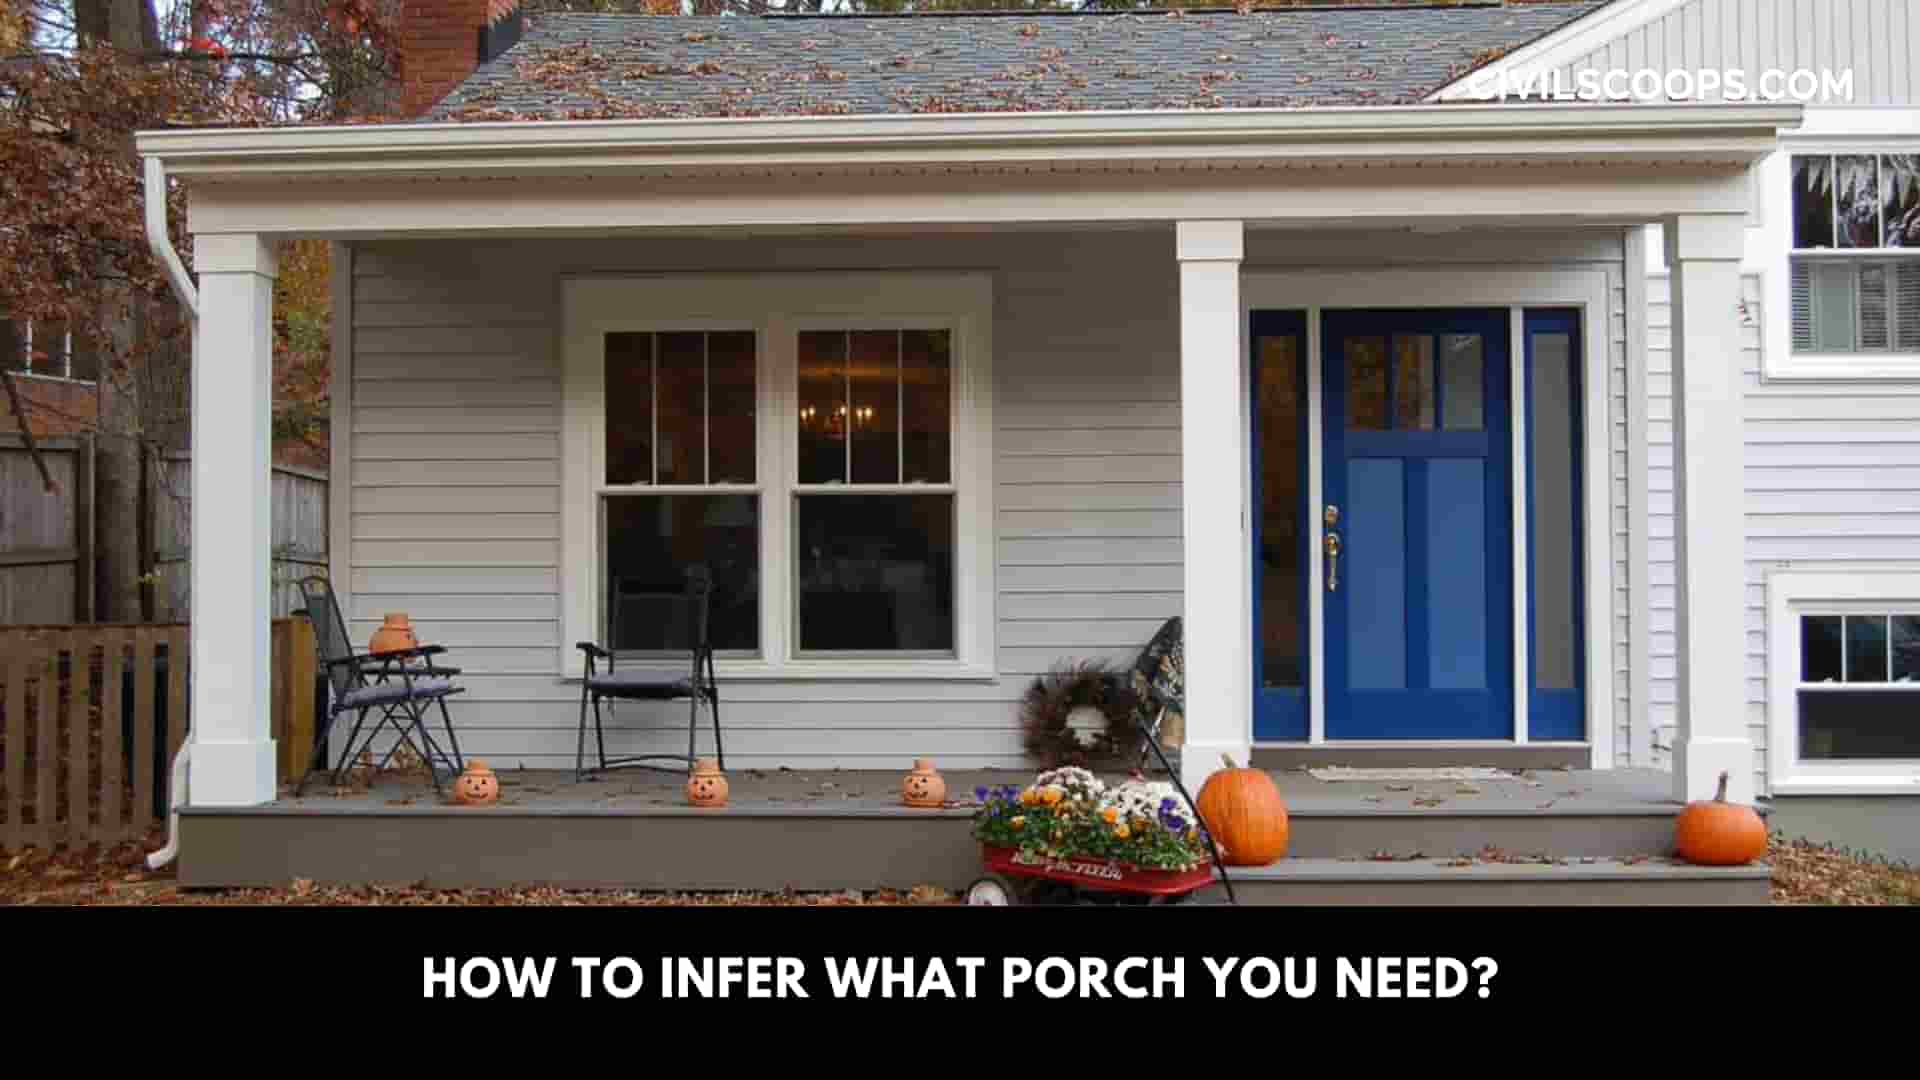 How to Infer What Porch You Need?